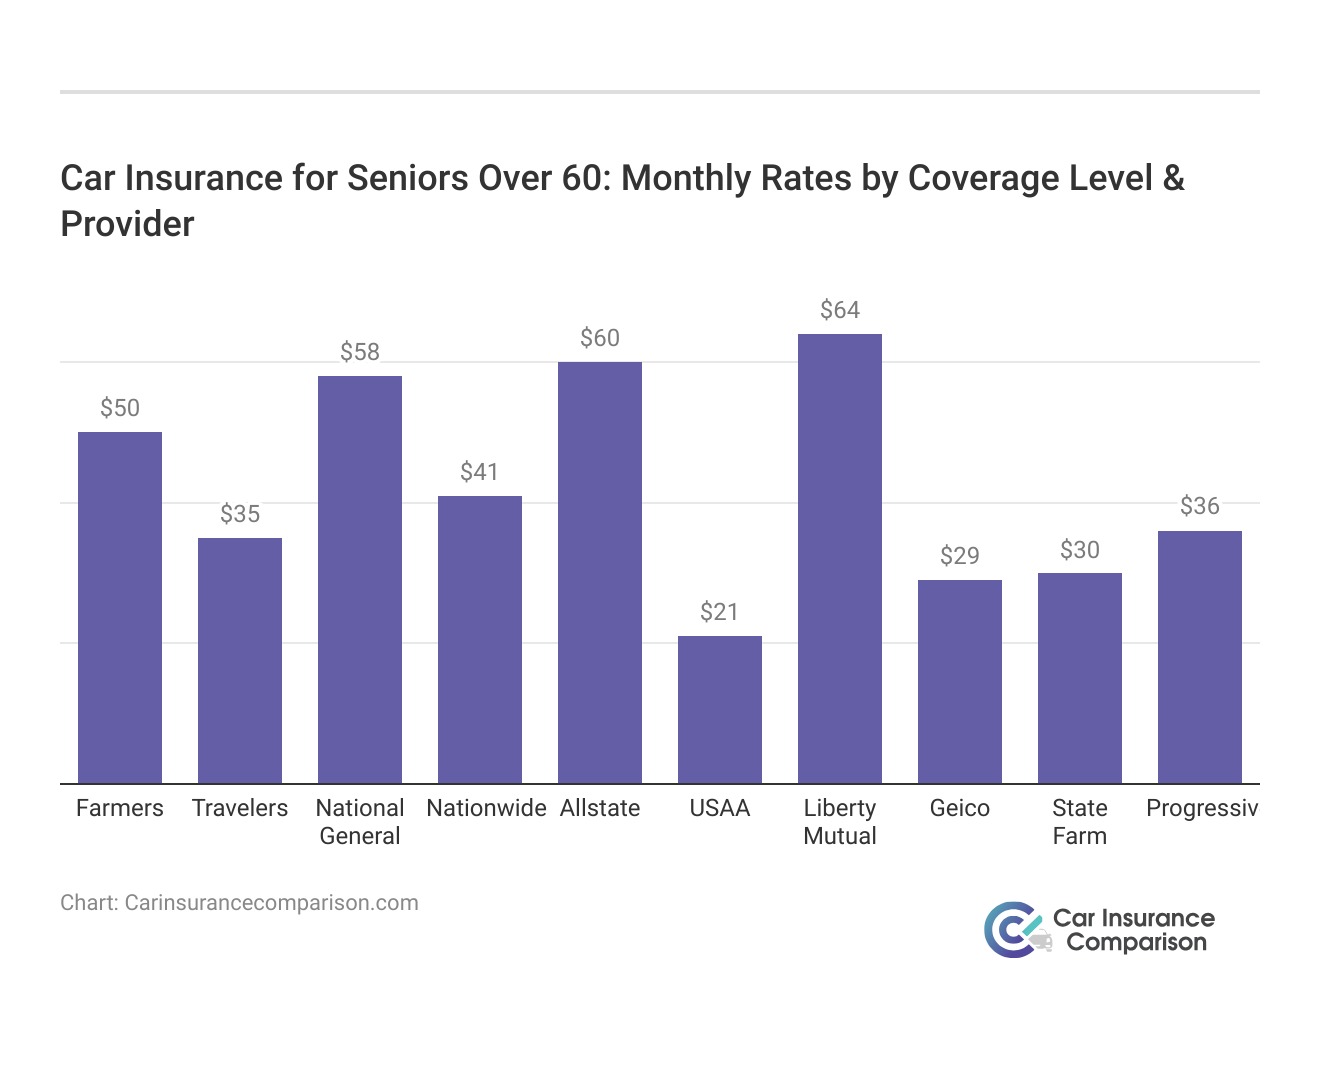 <h3>Car Insurance for Seniors Over 60: Monthly Rates by Coverage Level & Provider</h3>